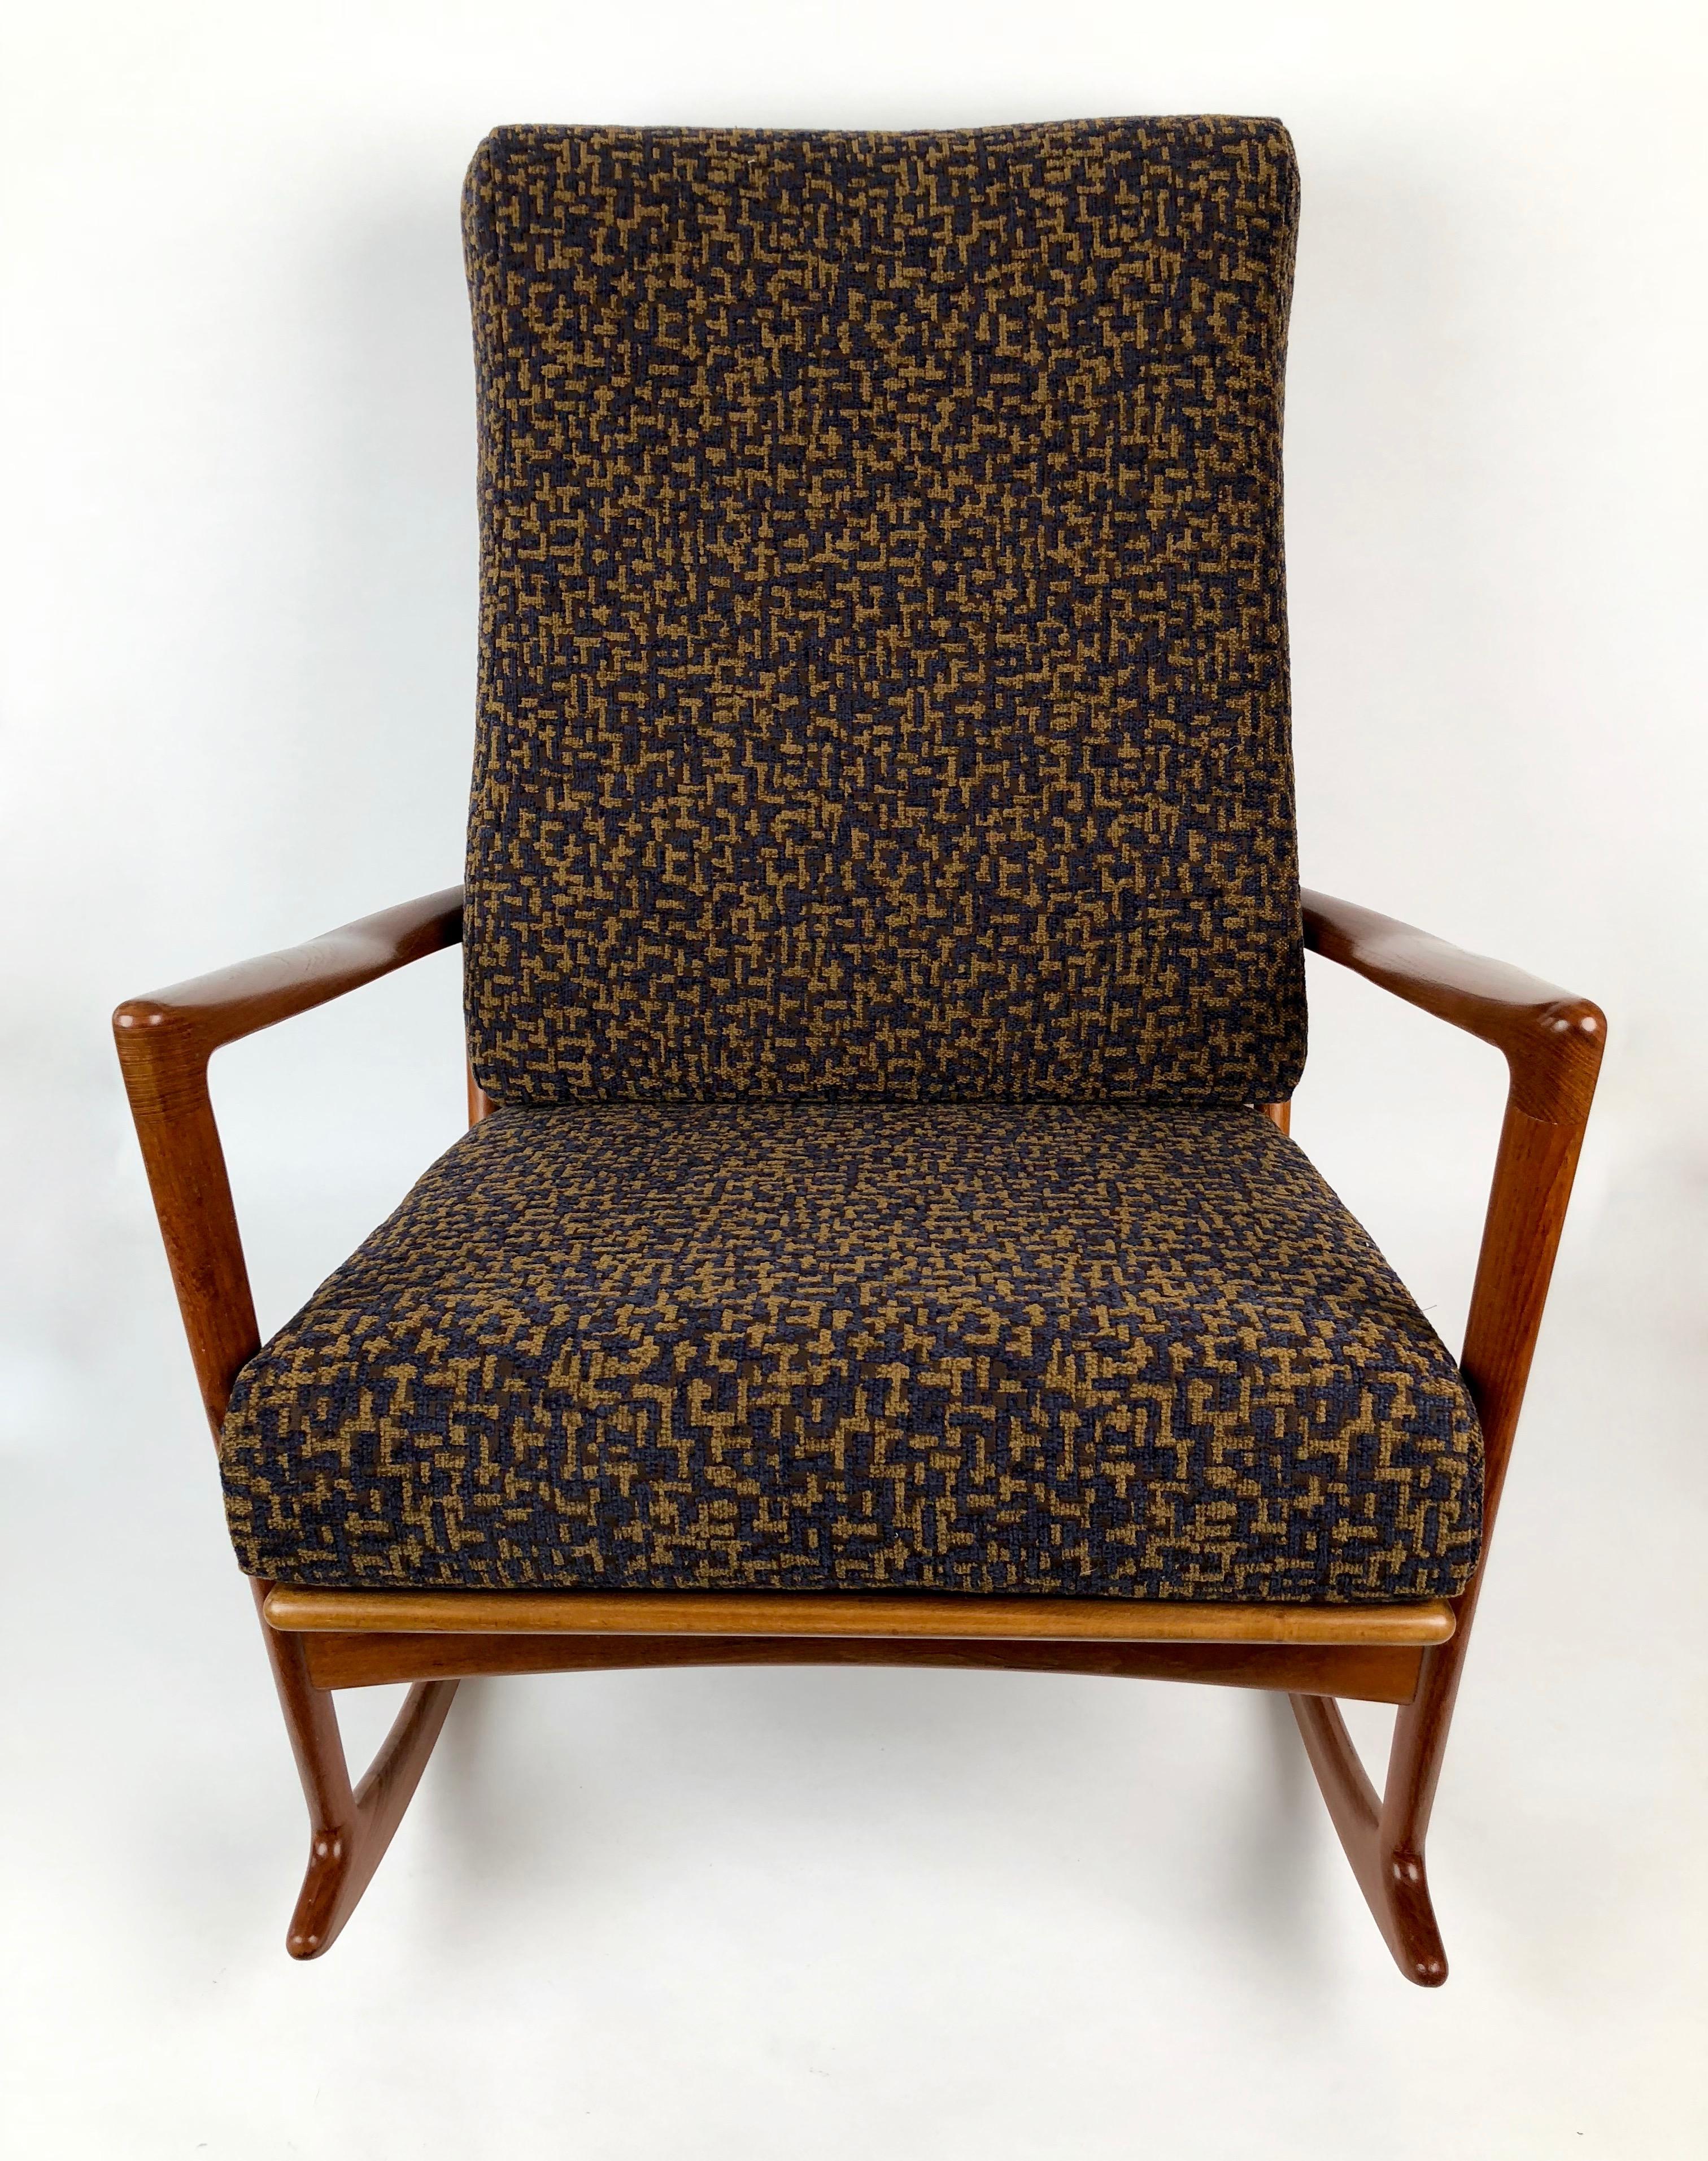 Ib Kofod-Larsen´s rocking chair, model 650-15 with solid teak frame and lose seat and back cushions.
Designed in 1962 and produced by Chr. Linnebergs Mobelfabric.
The cushions have been re upholstered in a Rubelli fabric. Teak wood has been